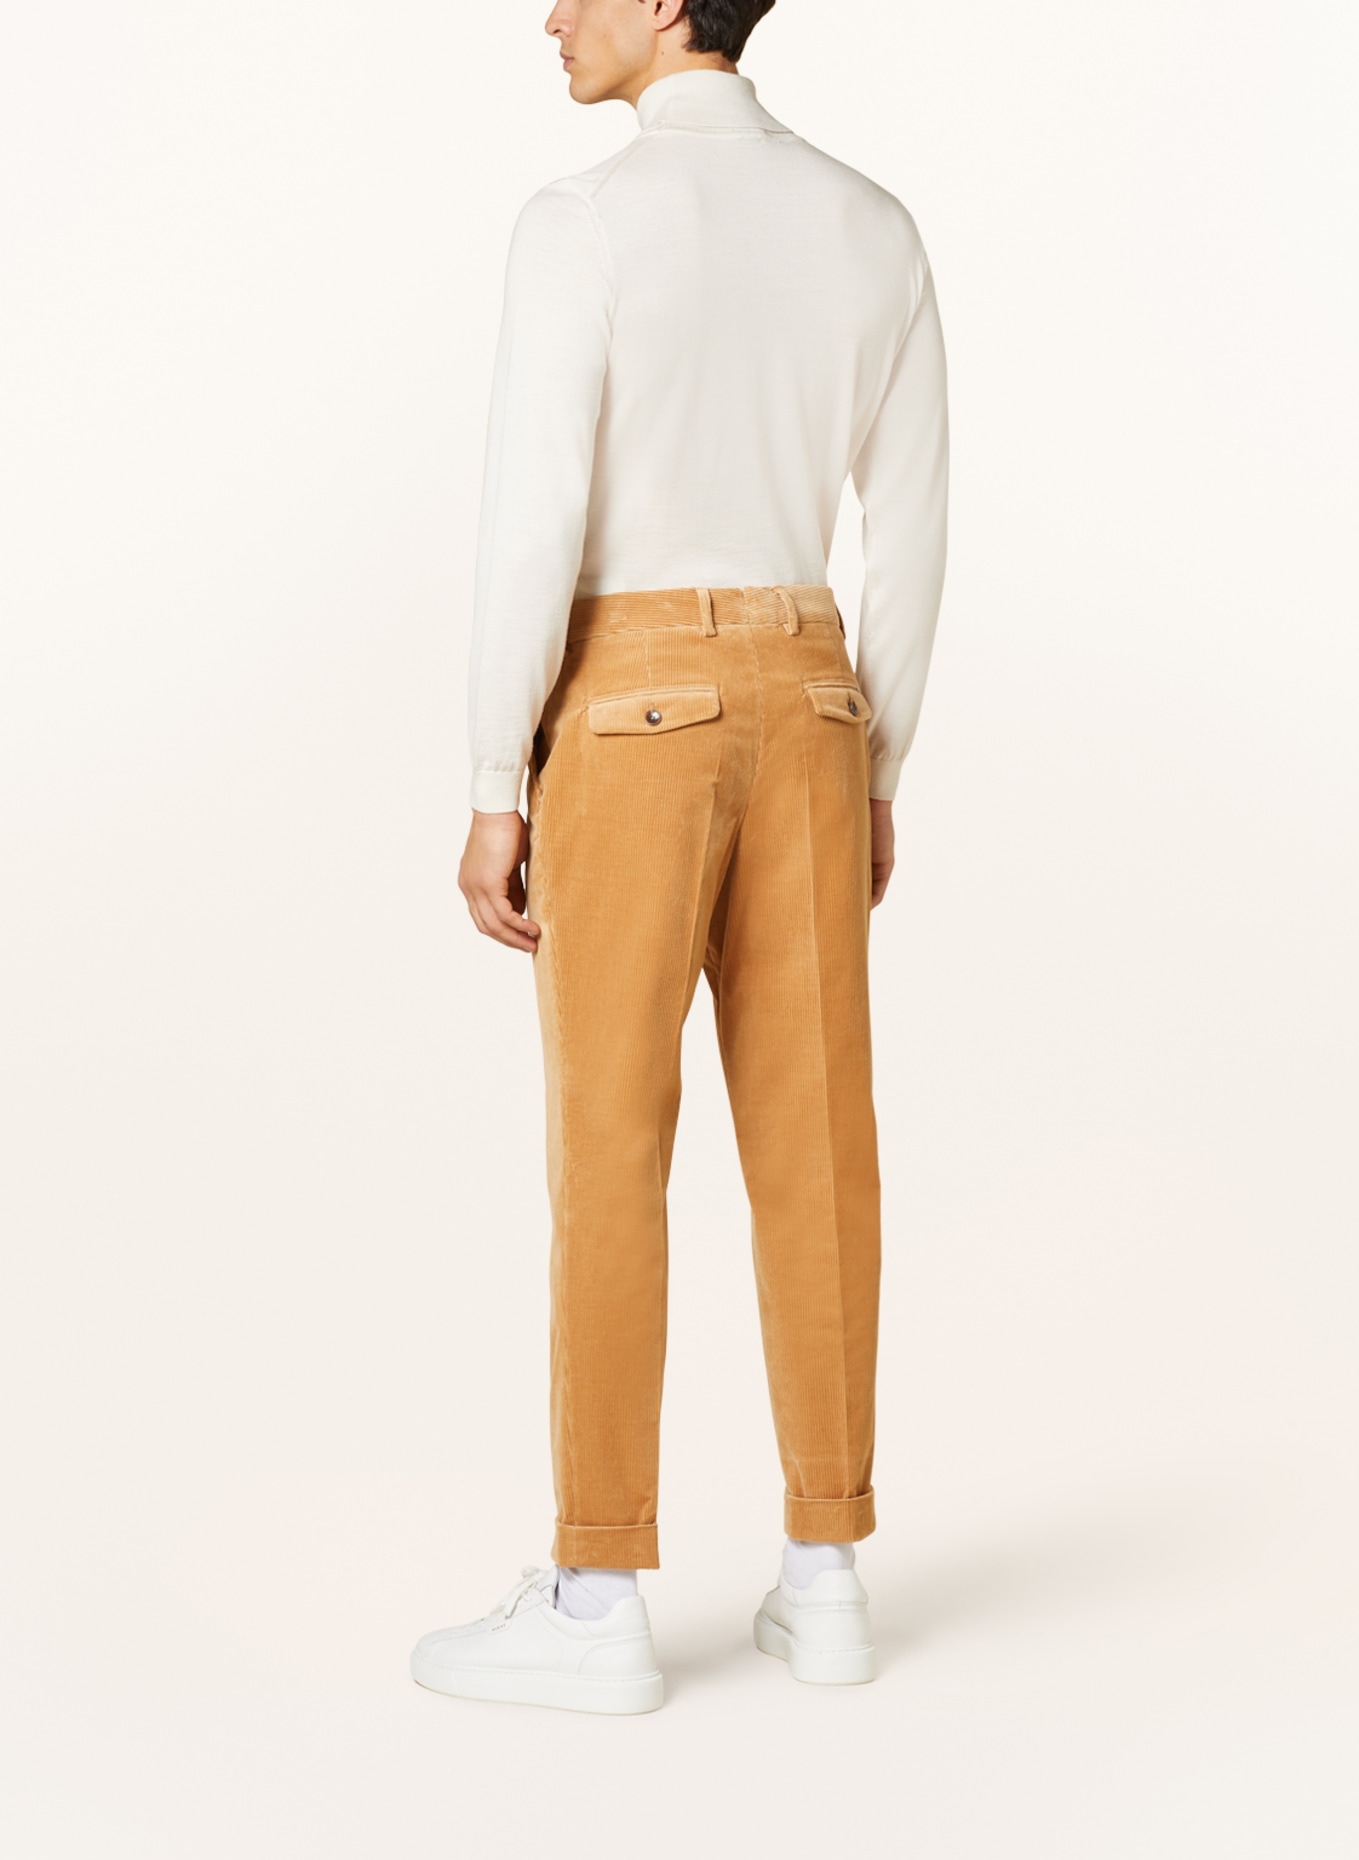 BOSS Cordhose H-PERIN Relaxed Fit, Farbe: CAMEL (Bild 3)